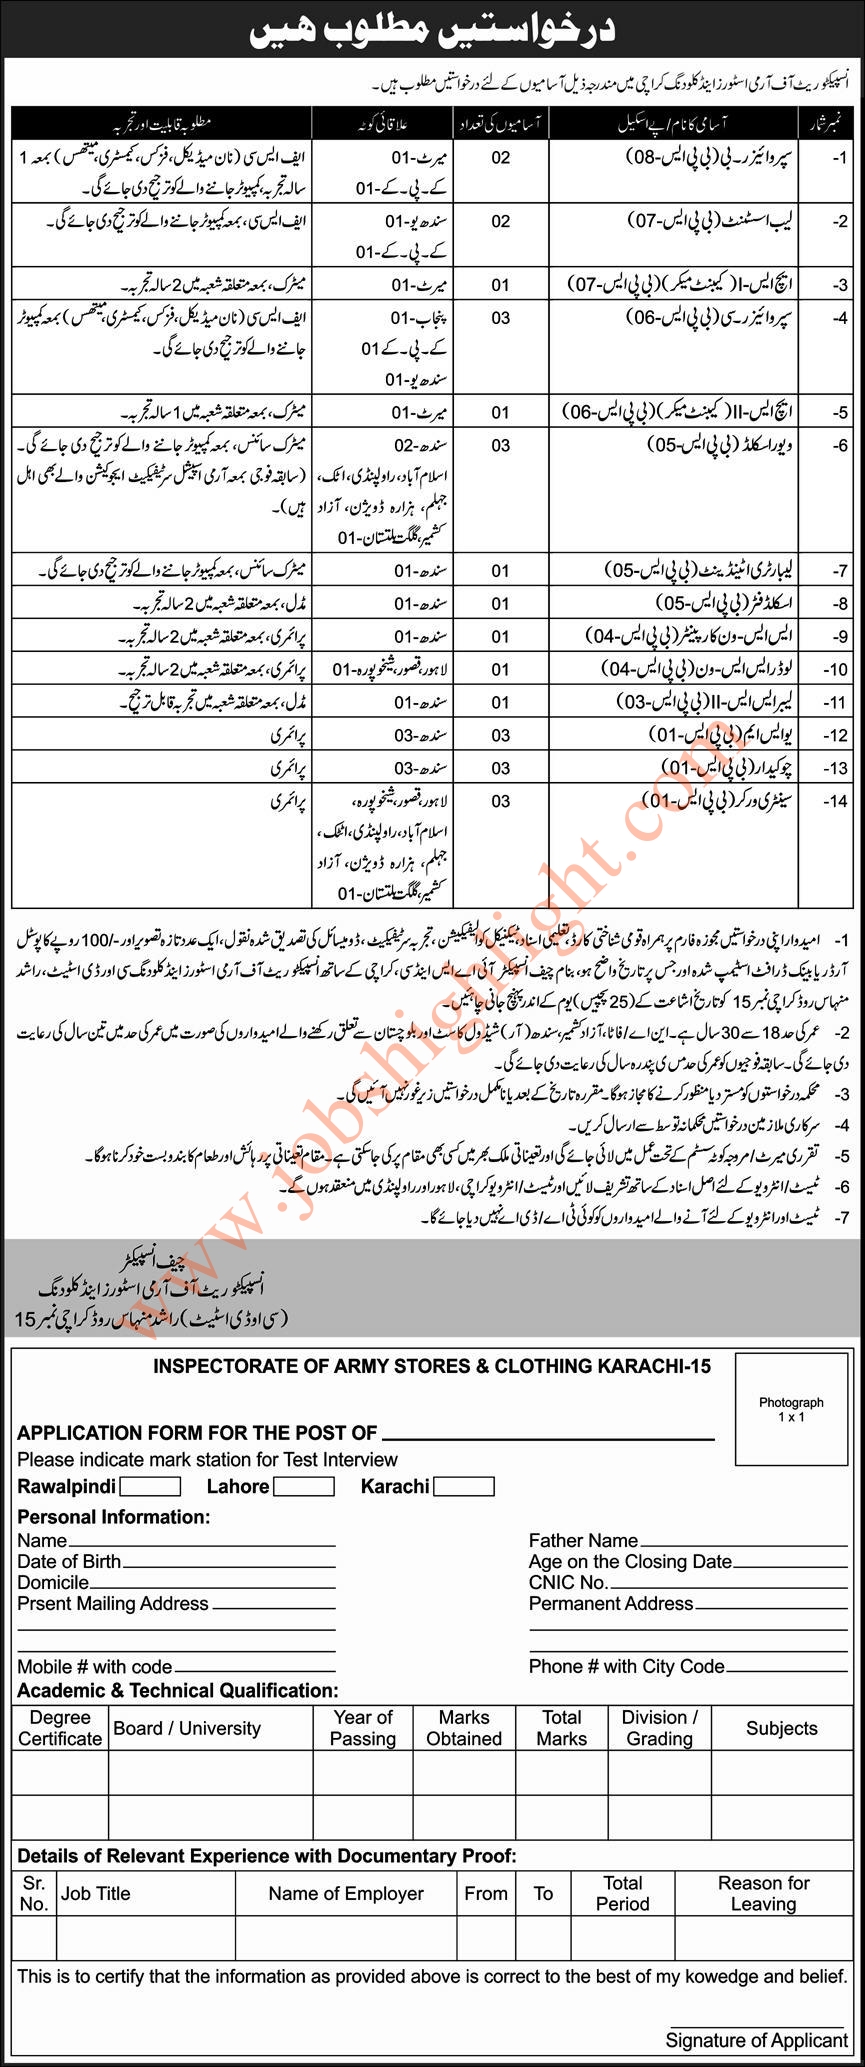 Pak Army Jobs 2021 Application Form, Inspectorate of Army Stores & Clothing